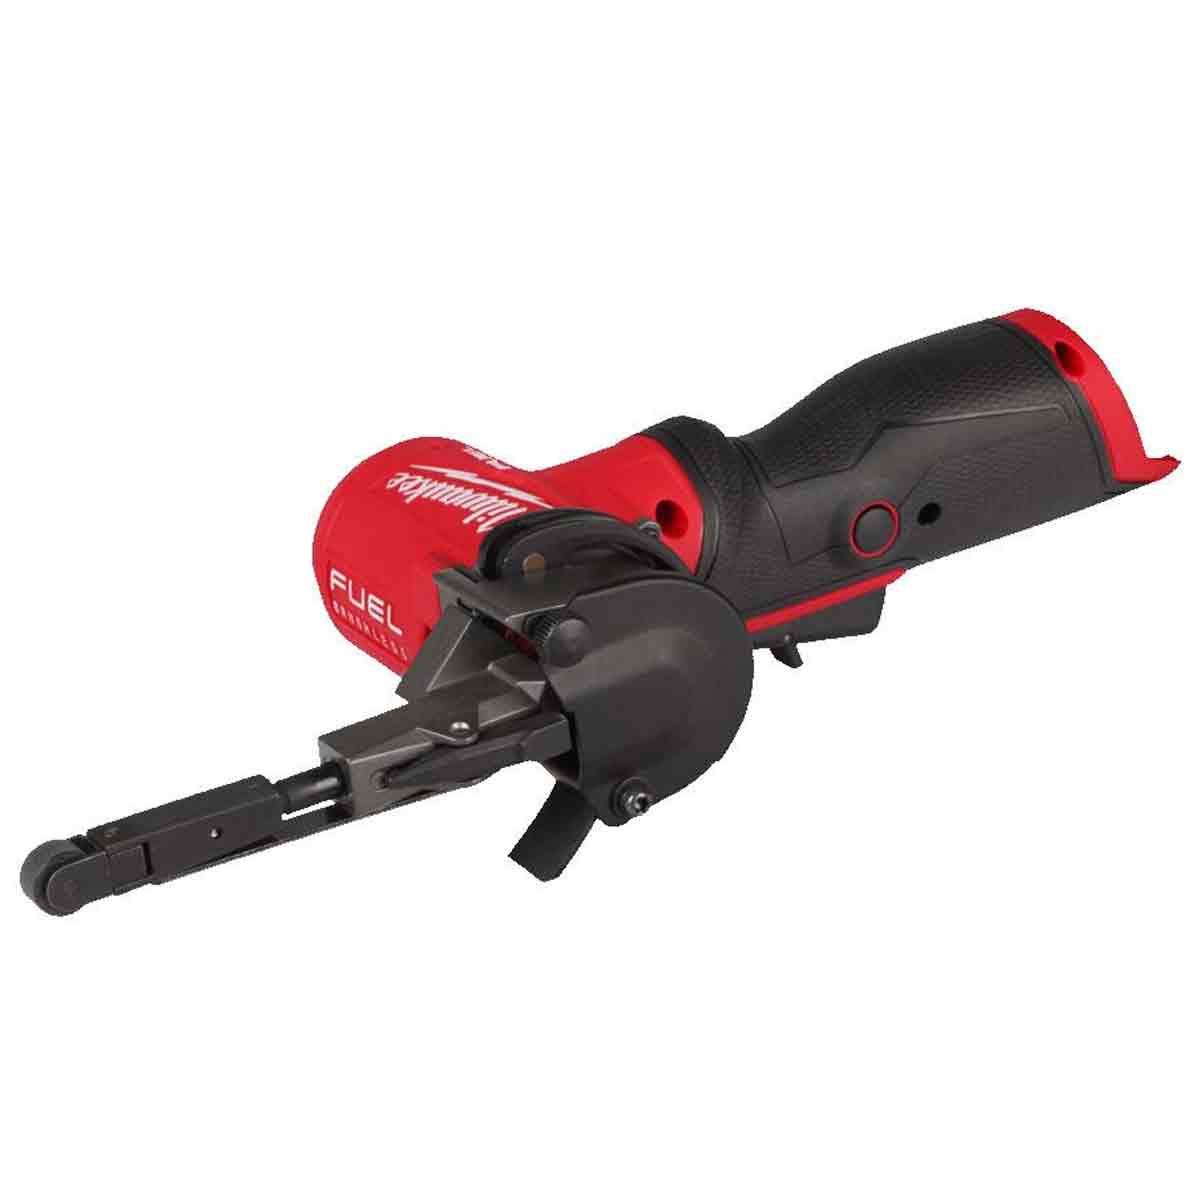 Milwaukee M12 FBFL10-0 12V Fuel Brushless 10mm Band File Body Only 4933480958